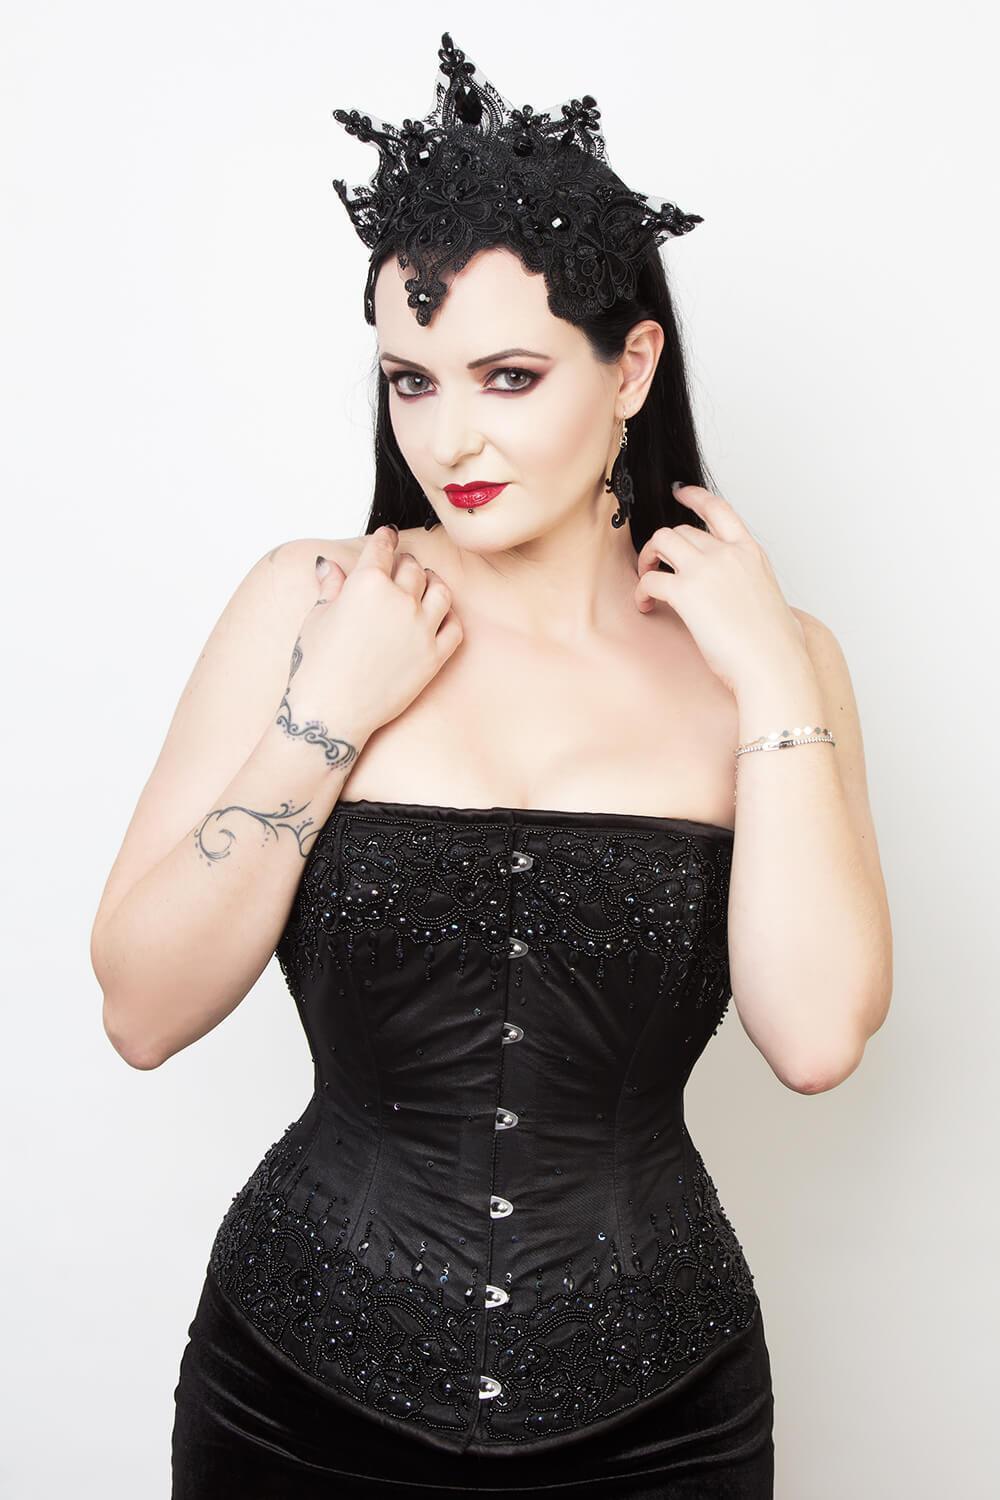 Check out some best Bespoke Overbust Black Corsets from our collection